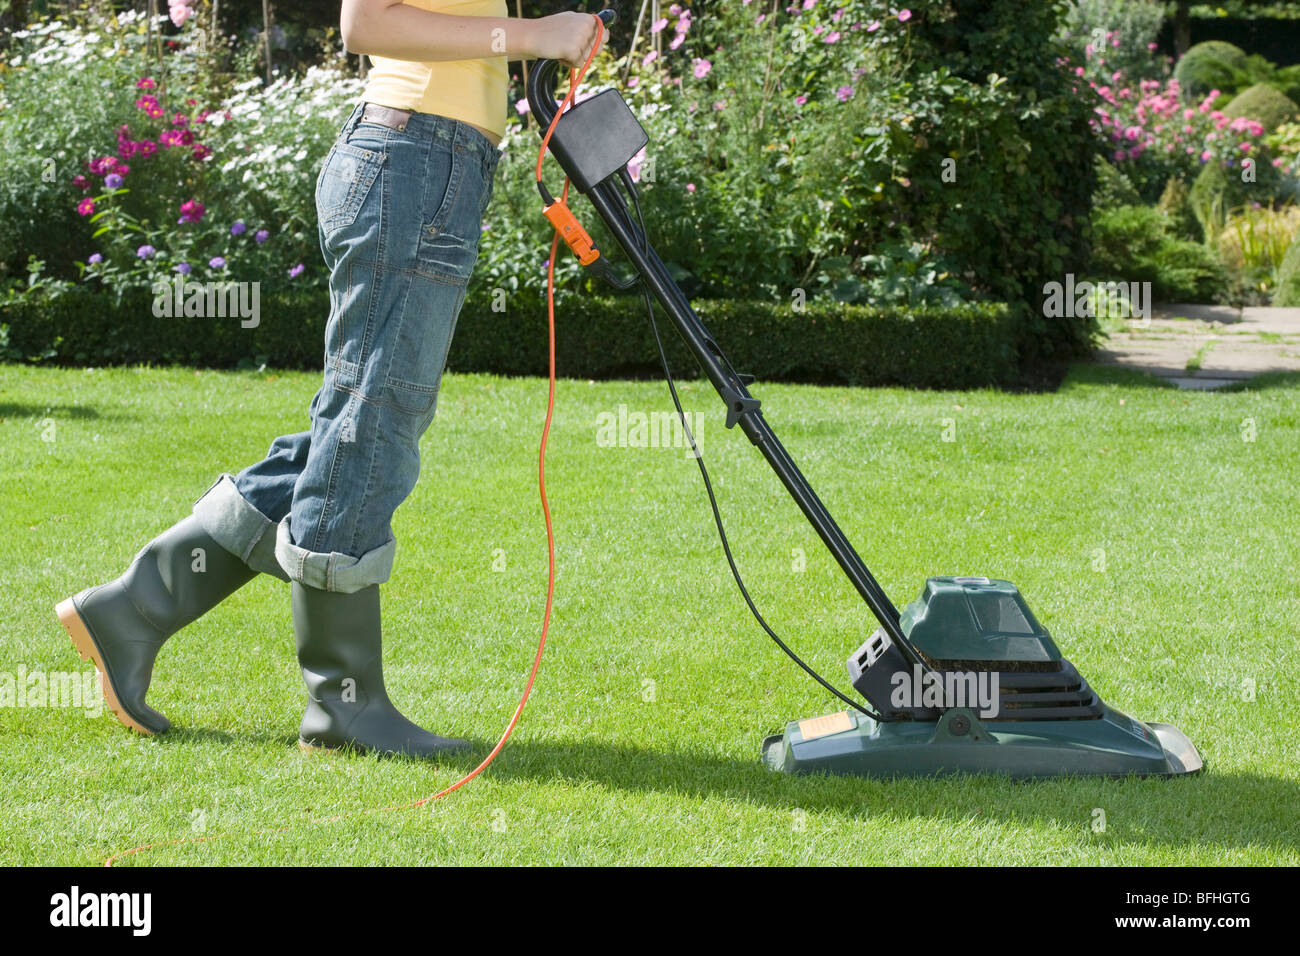 Woman Mowing Lawn With electric Lawn Mower Stock Photo